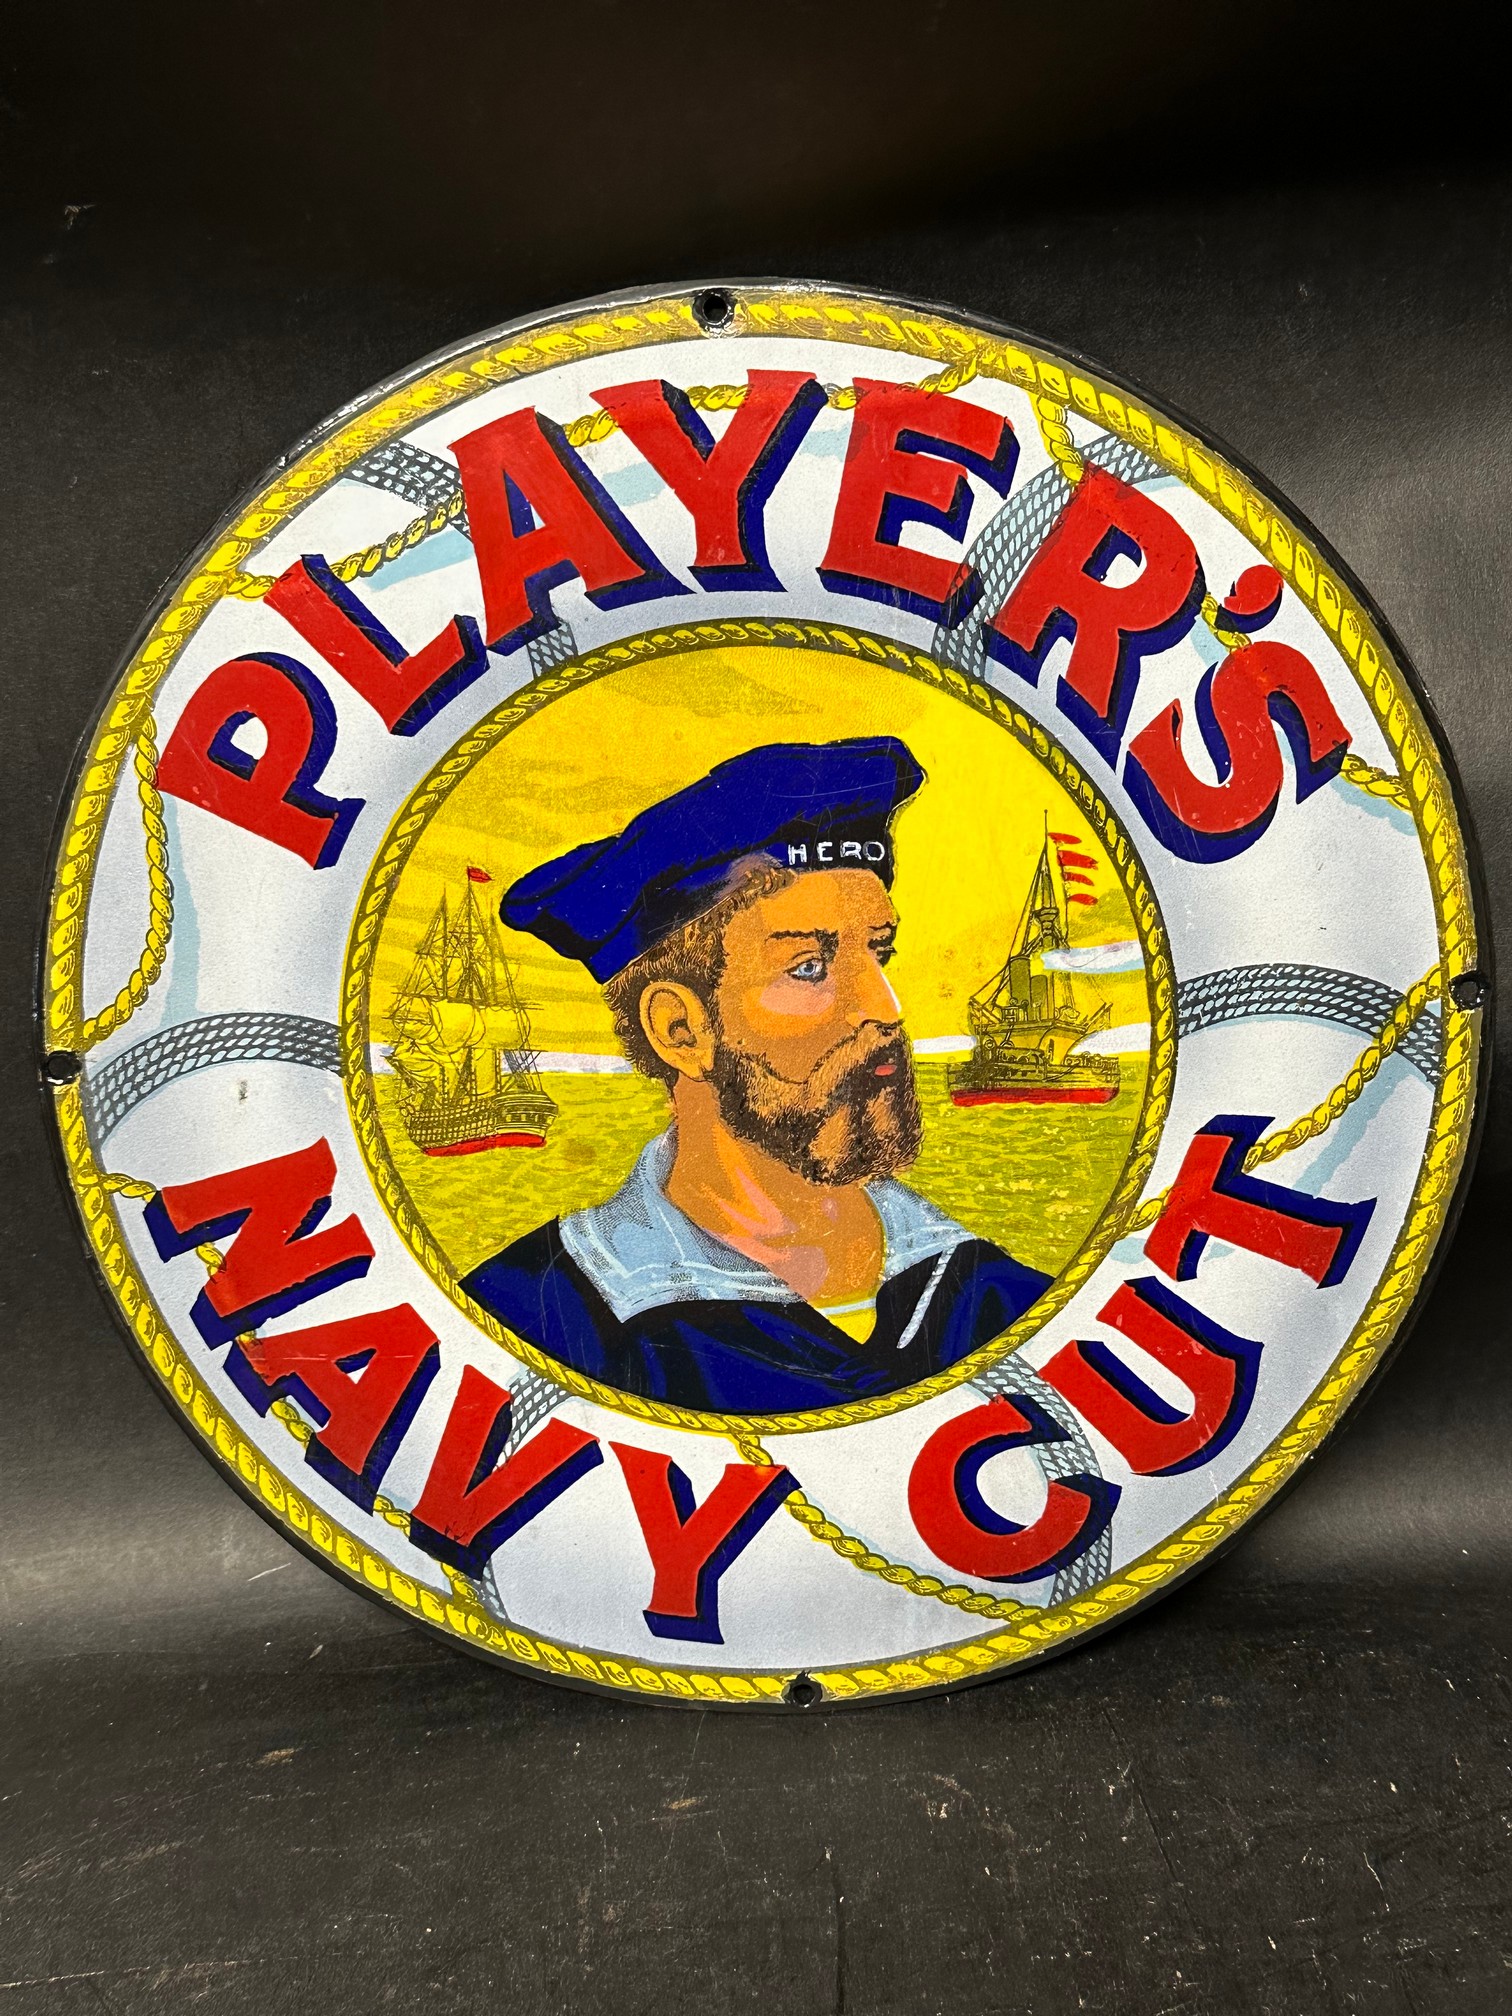 A Player's Navy Cut circular enamel advertising sign (cut out from a larger sign), 12 1/4" diameter.